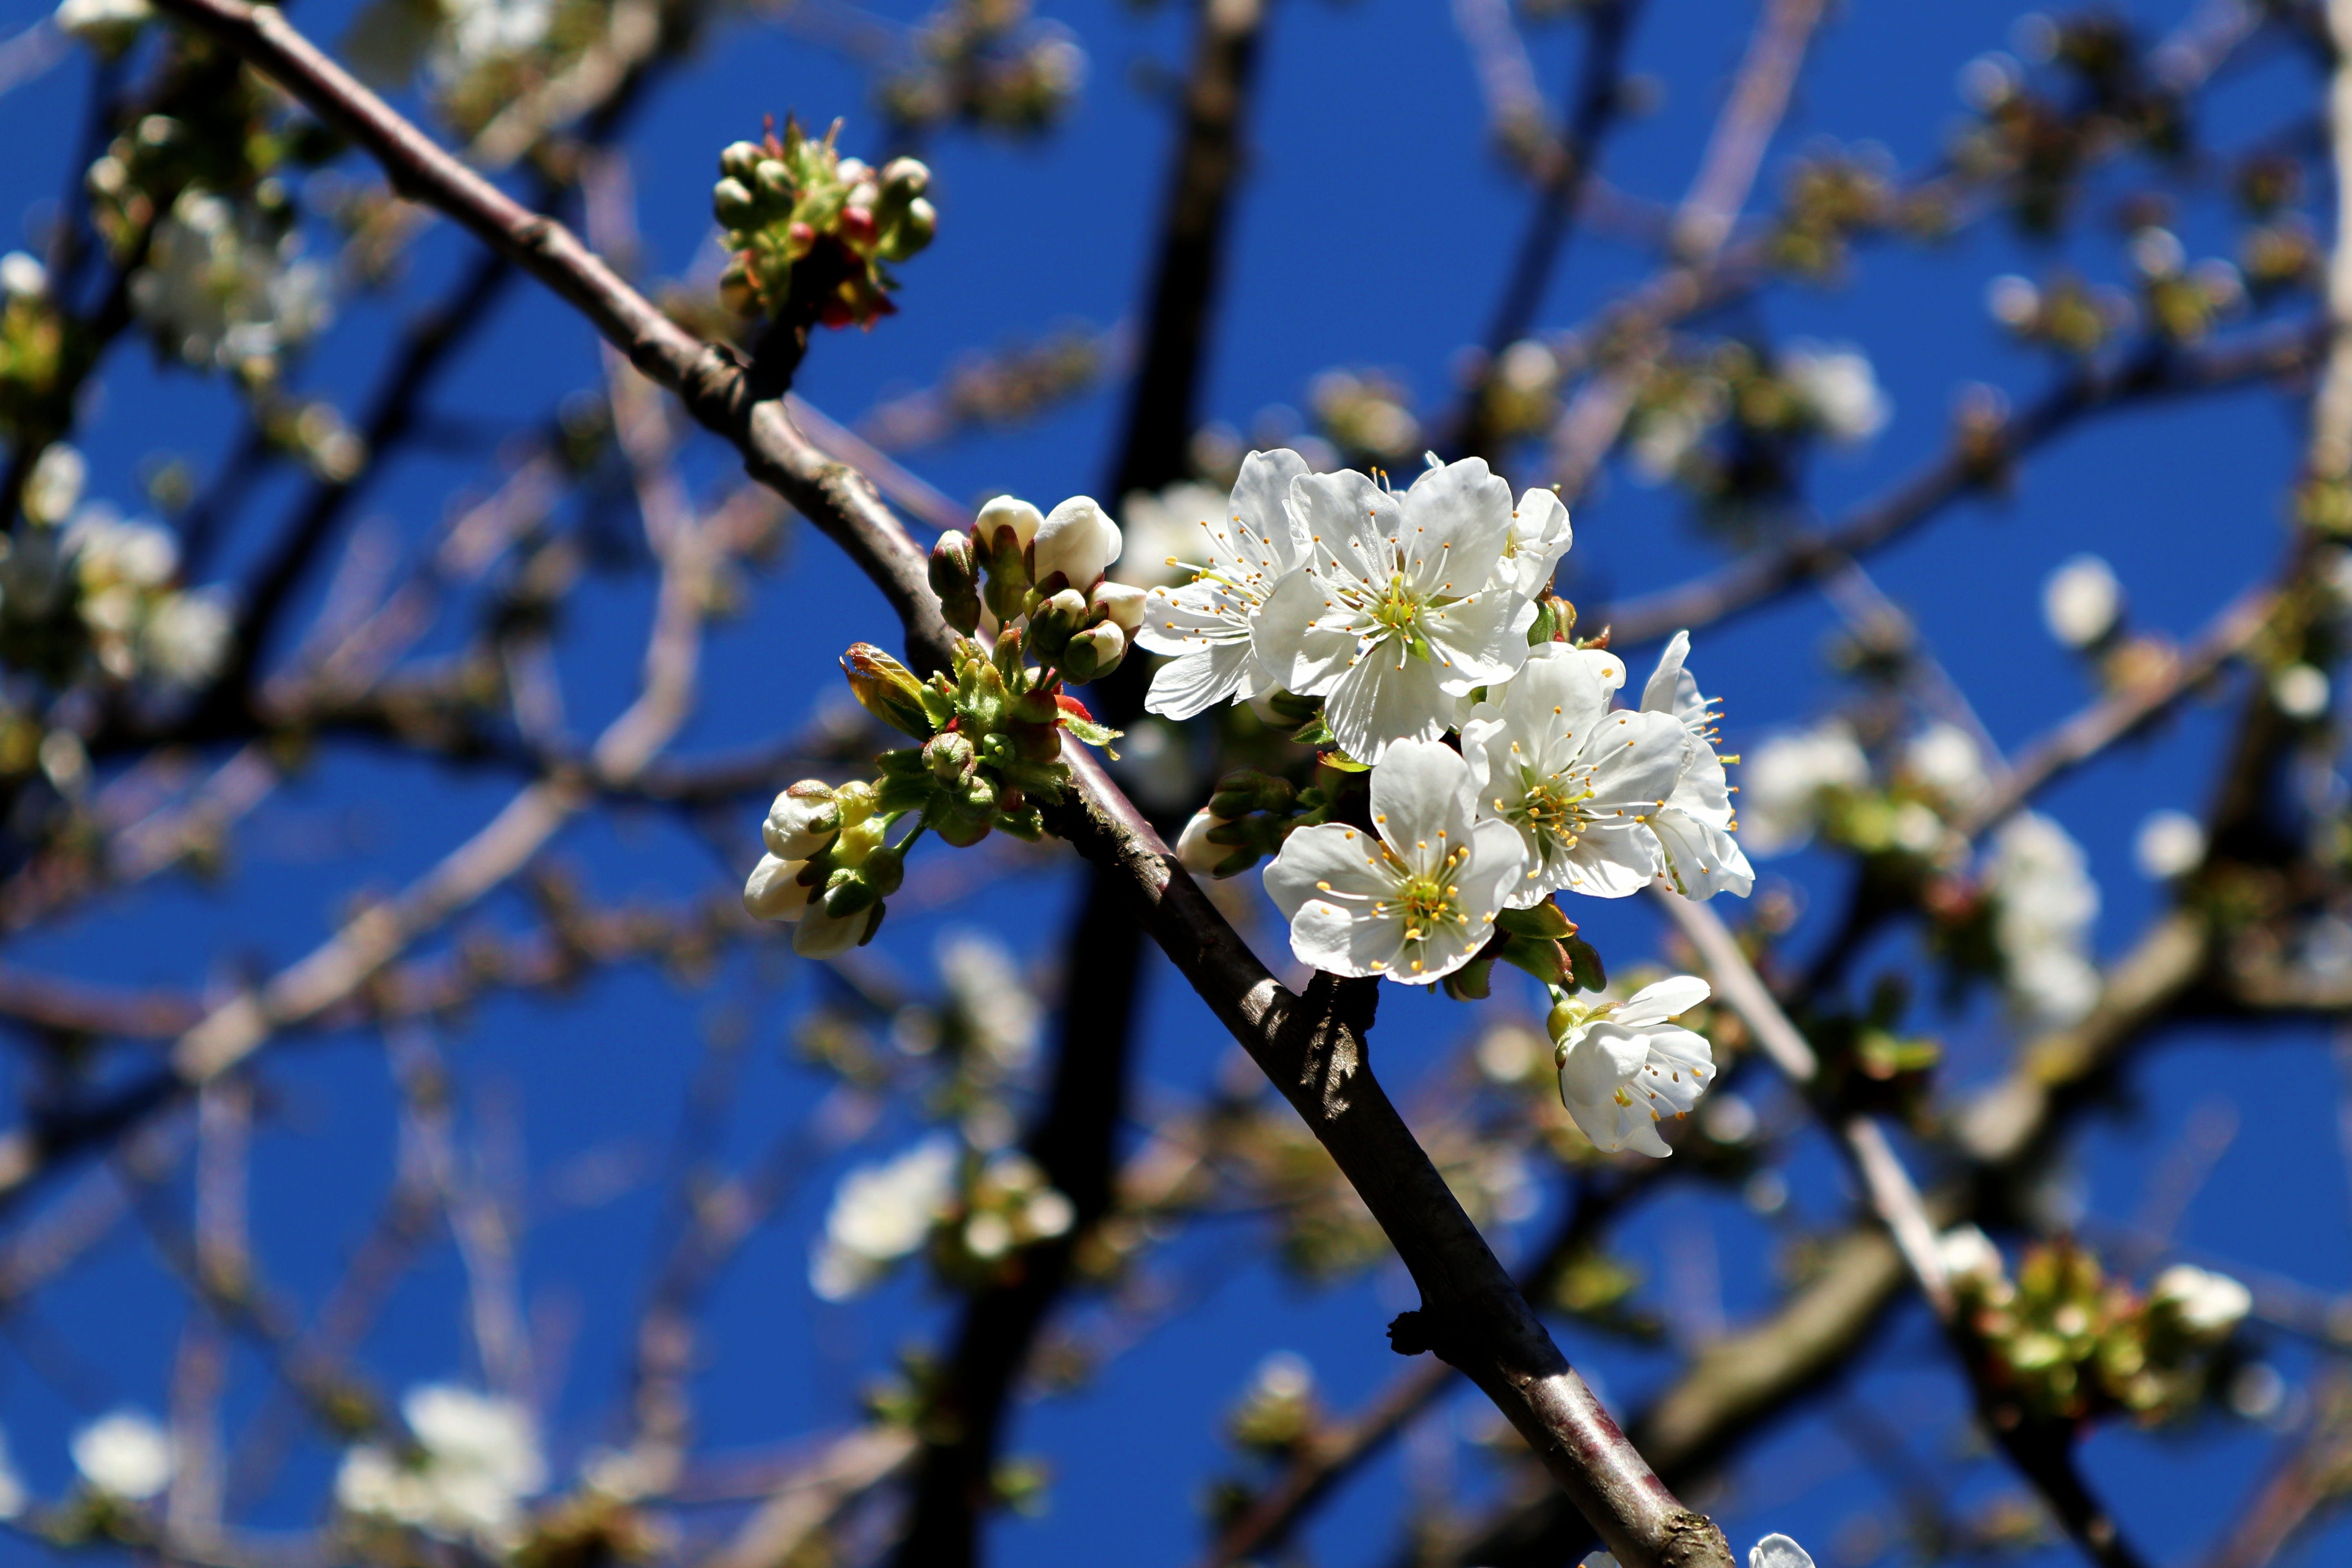 Wallpaper / Beauty In Nature, Apple Tree, Cherry Blossom, No People, Bloom, Branches, Outdoors, Apple Blossom Branch, Growth, Close Up, Fruit Tree, Apple, Aesthetic Free Download